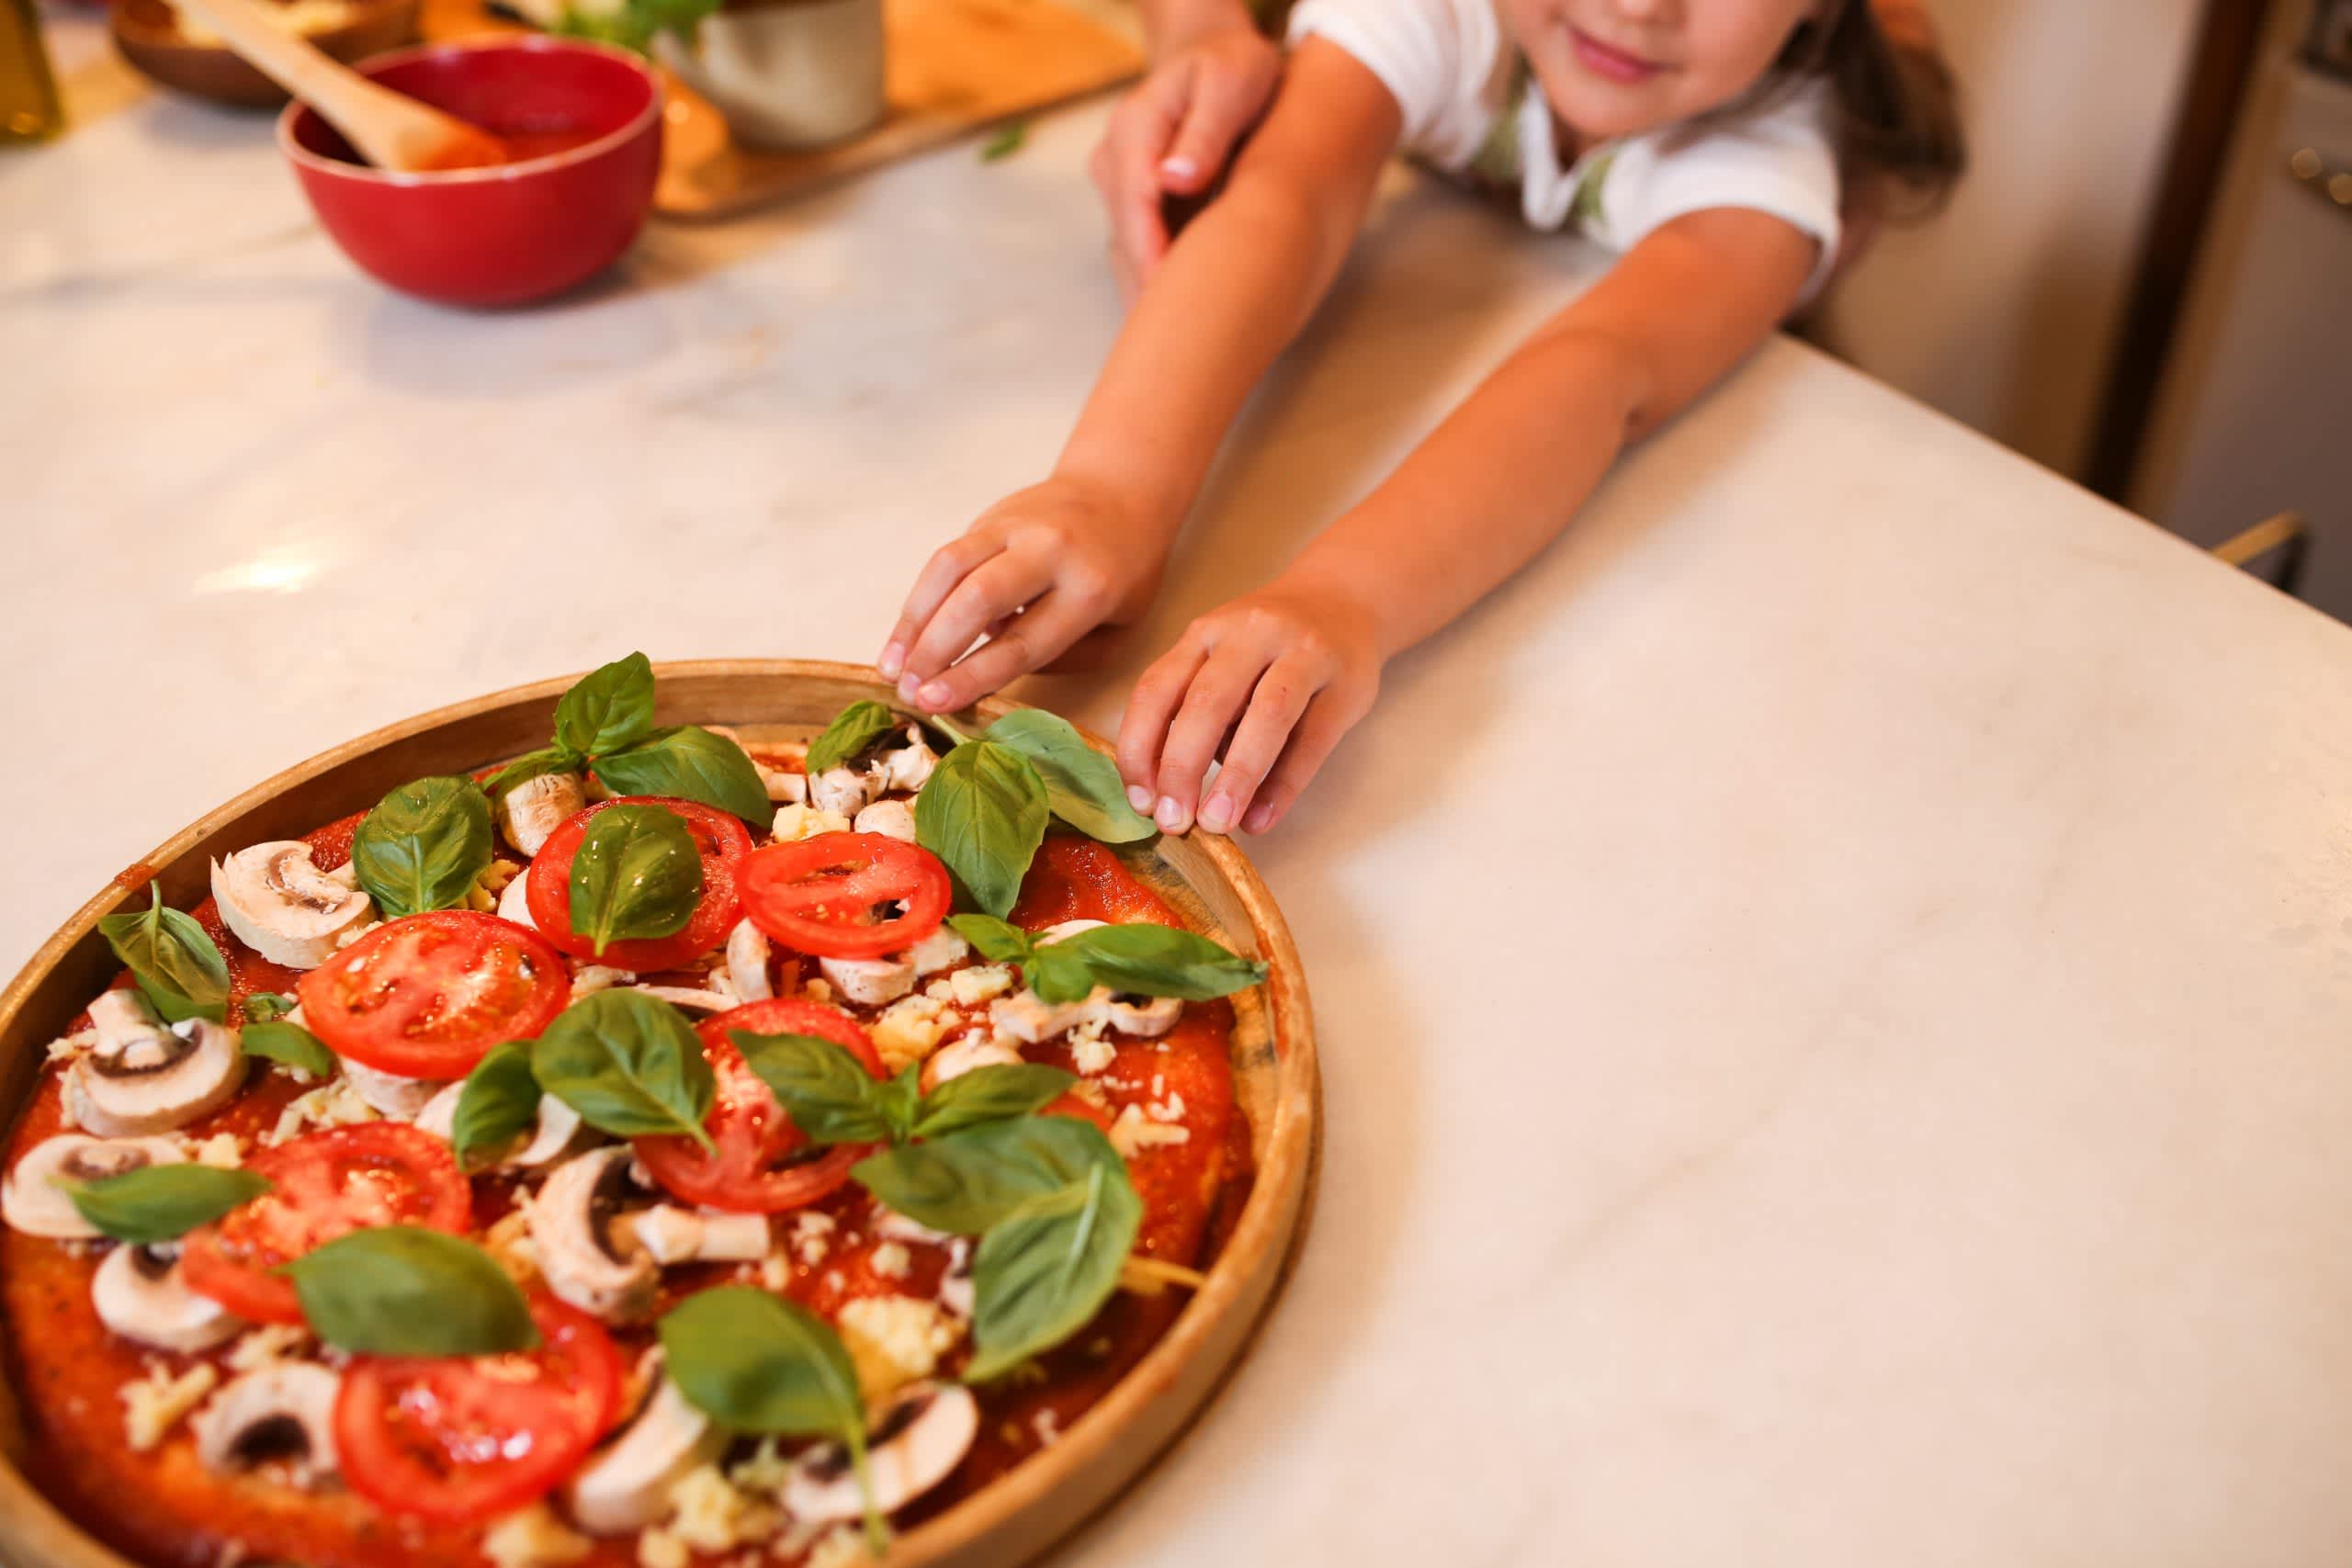 A child reaching for a homemade pizza